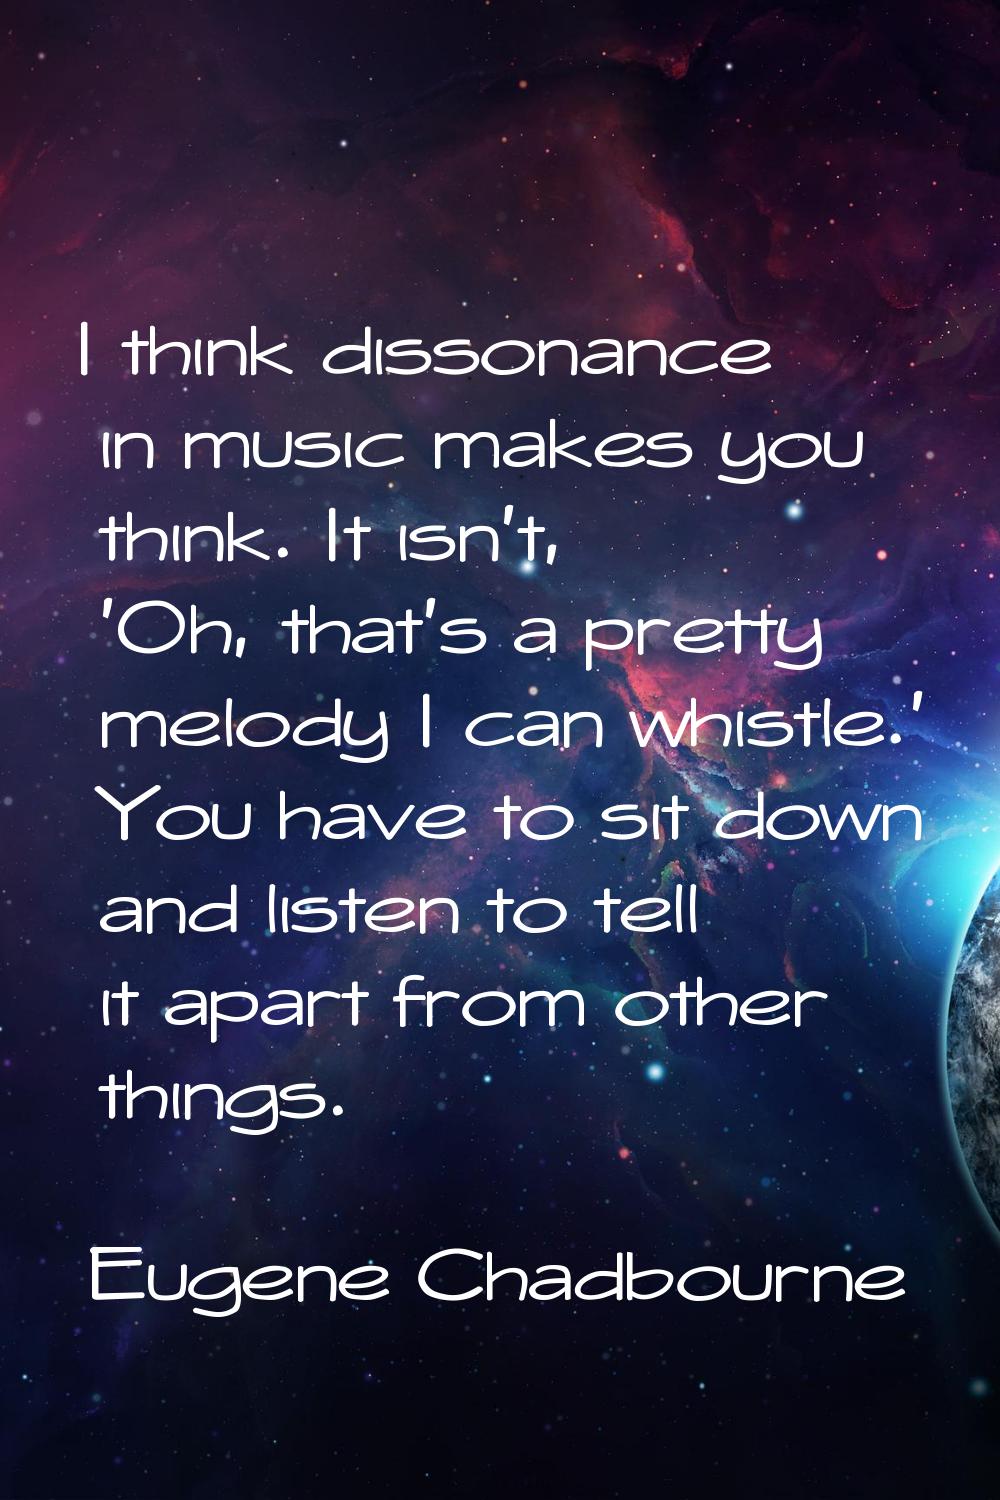 I think dissonance in music makes you think. It isn't, 'Oh, that's a pretty melody I can whistle.' 